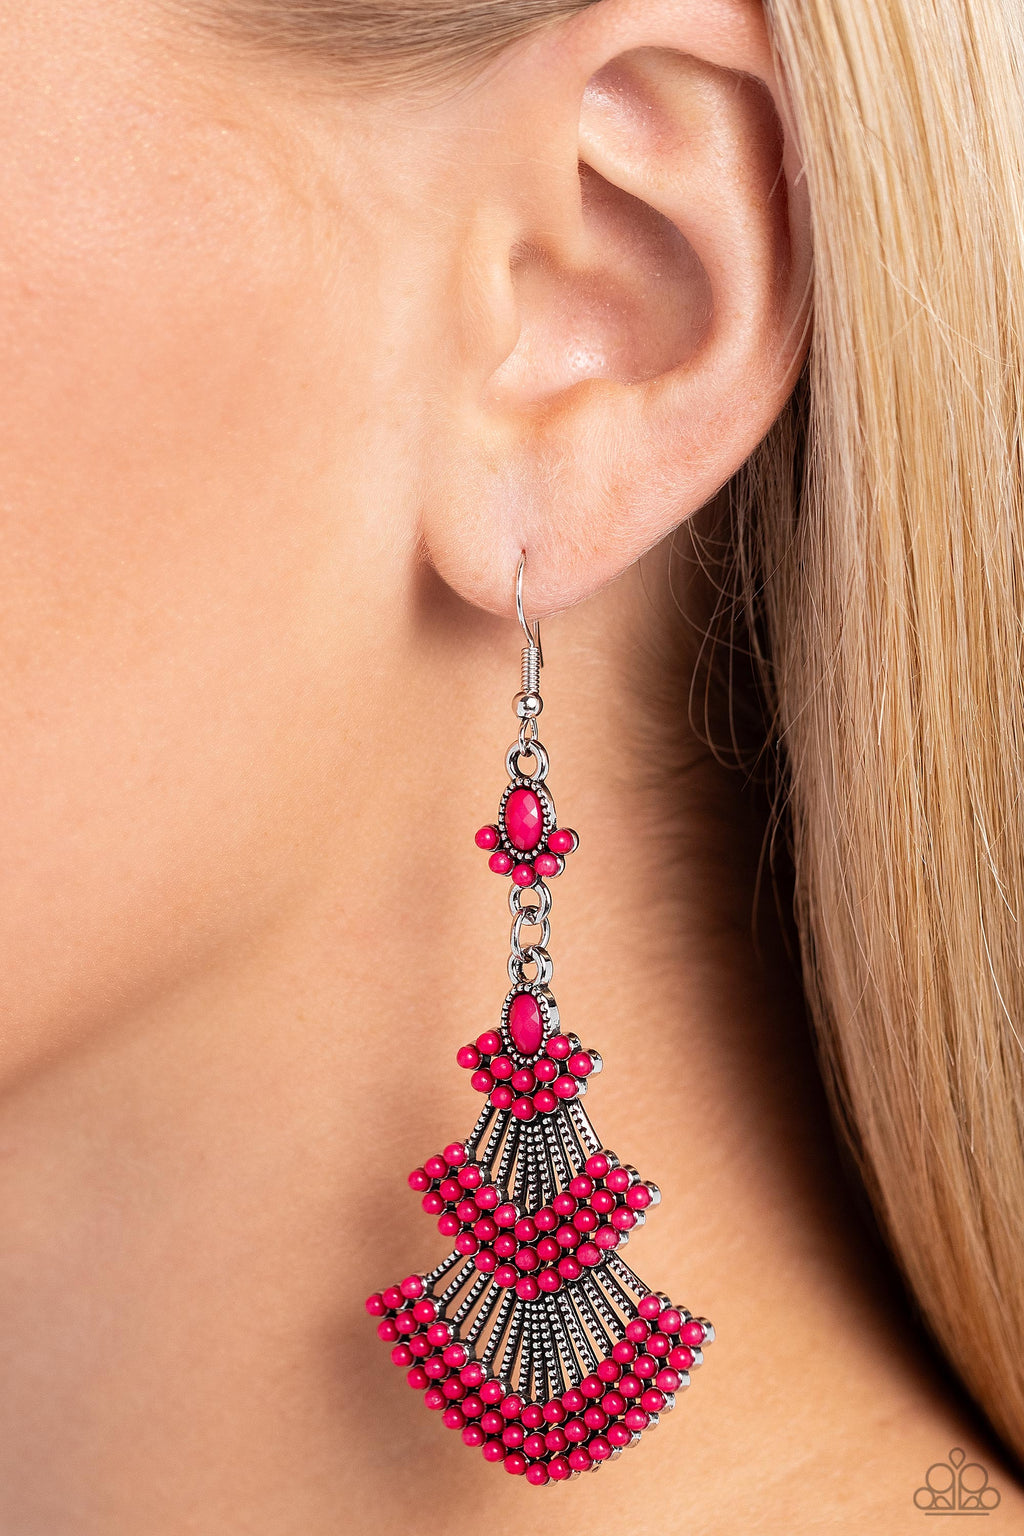 Paparazzi - Eastern Expression - Pink Earrings